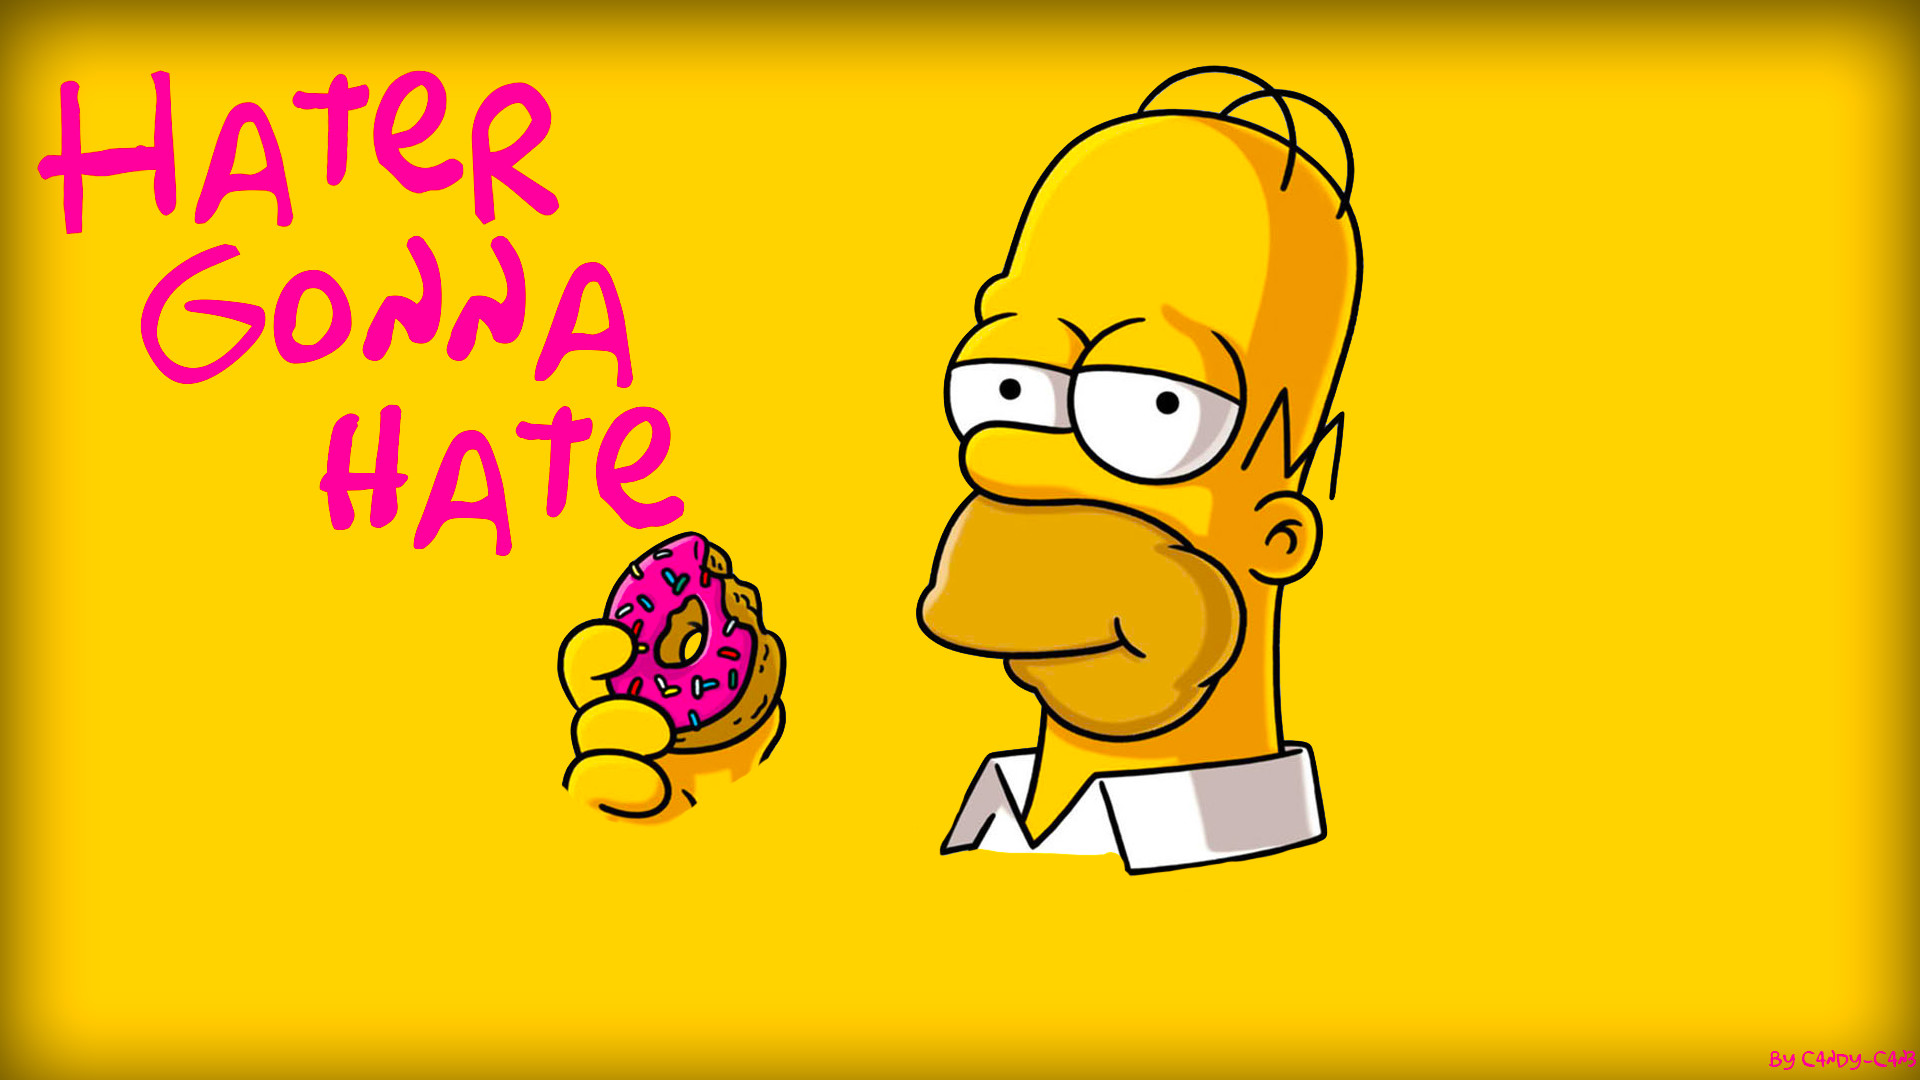 1920x1080 ... Homer Simpson Hater Gonna Hate Wallpaper by Candy-C4n3